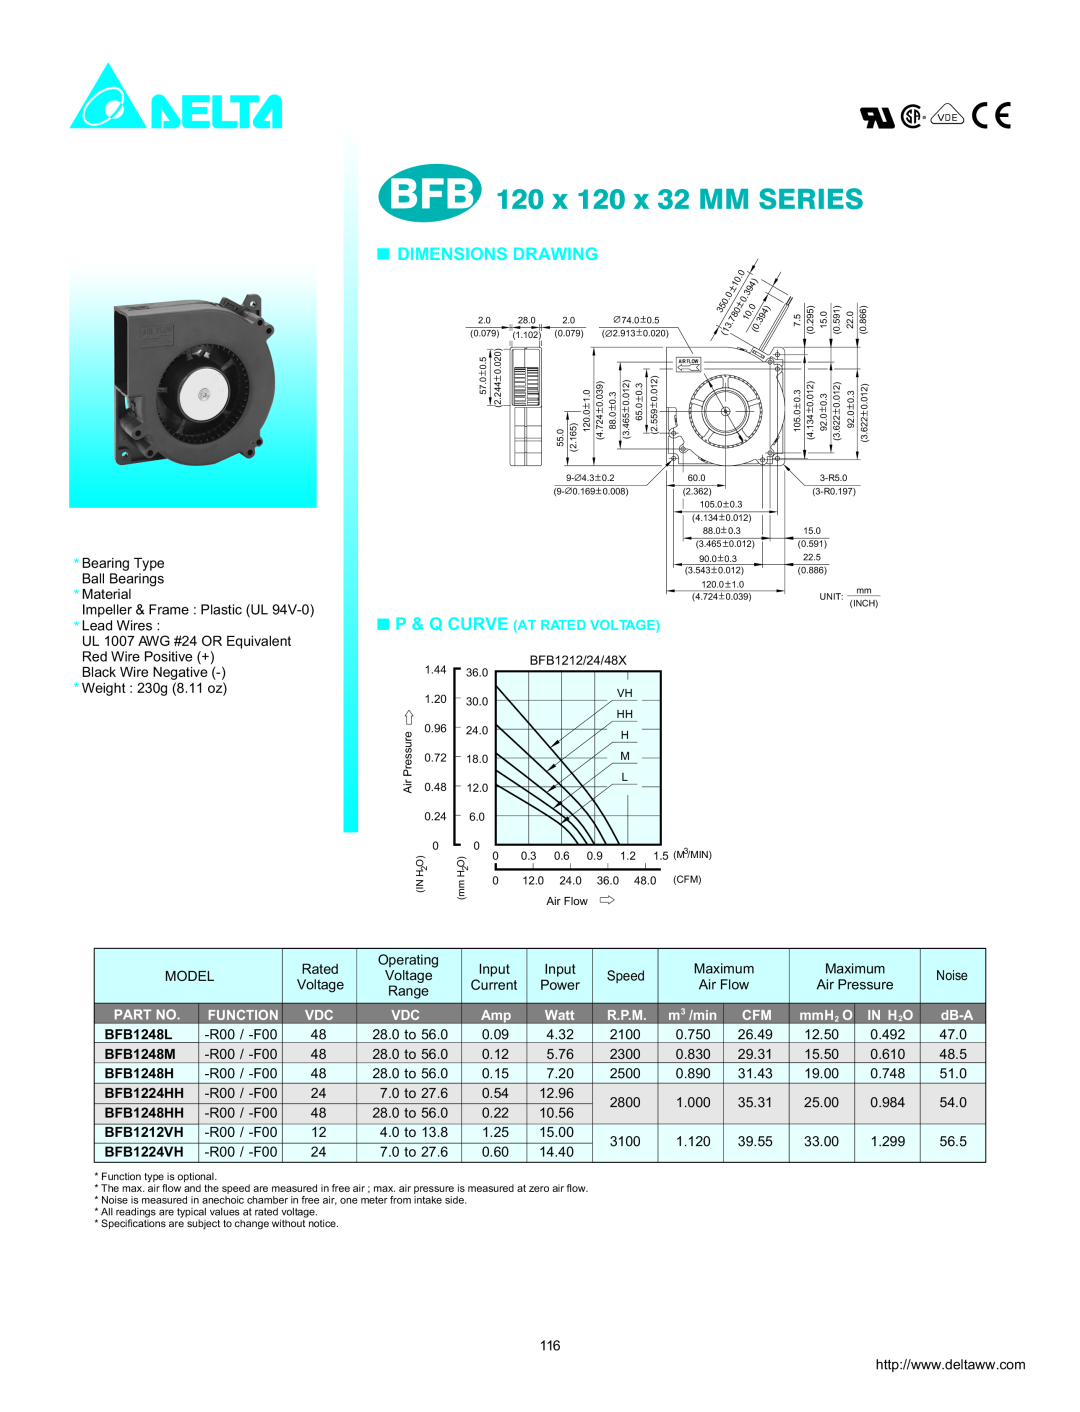 Delta Electronics BFB1212HH BFB 120 x 120 x 32 MM SERIES, Dimensions Drawing, P & Q Curve At Rated Voltage, Function, dB-A 